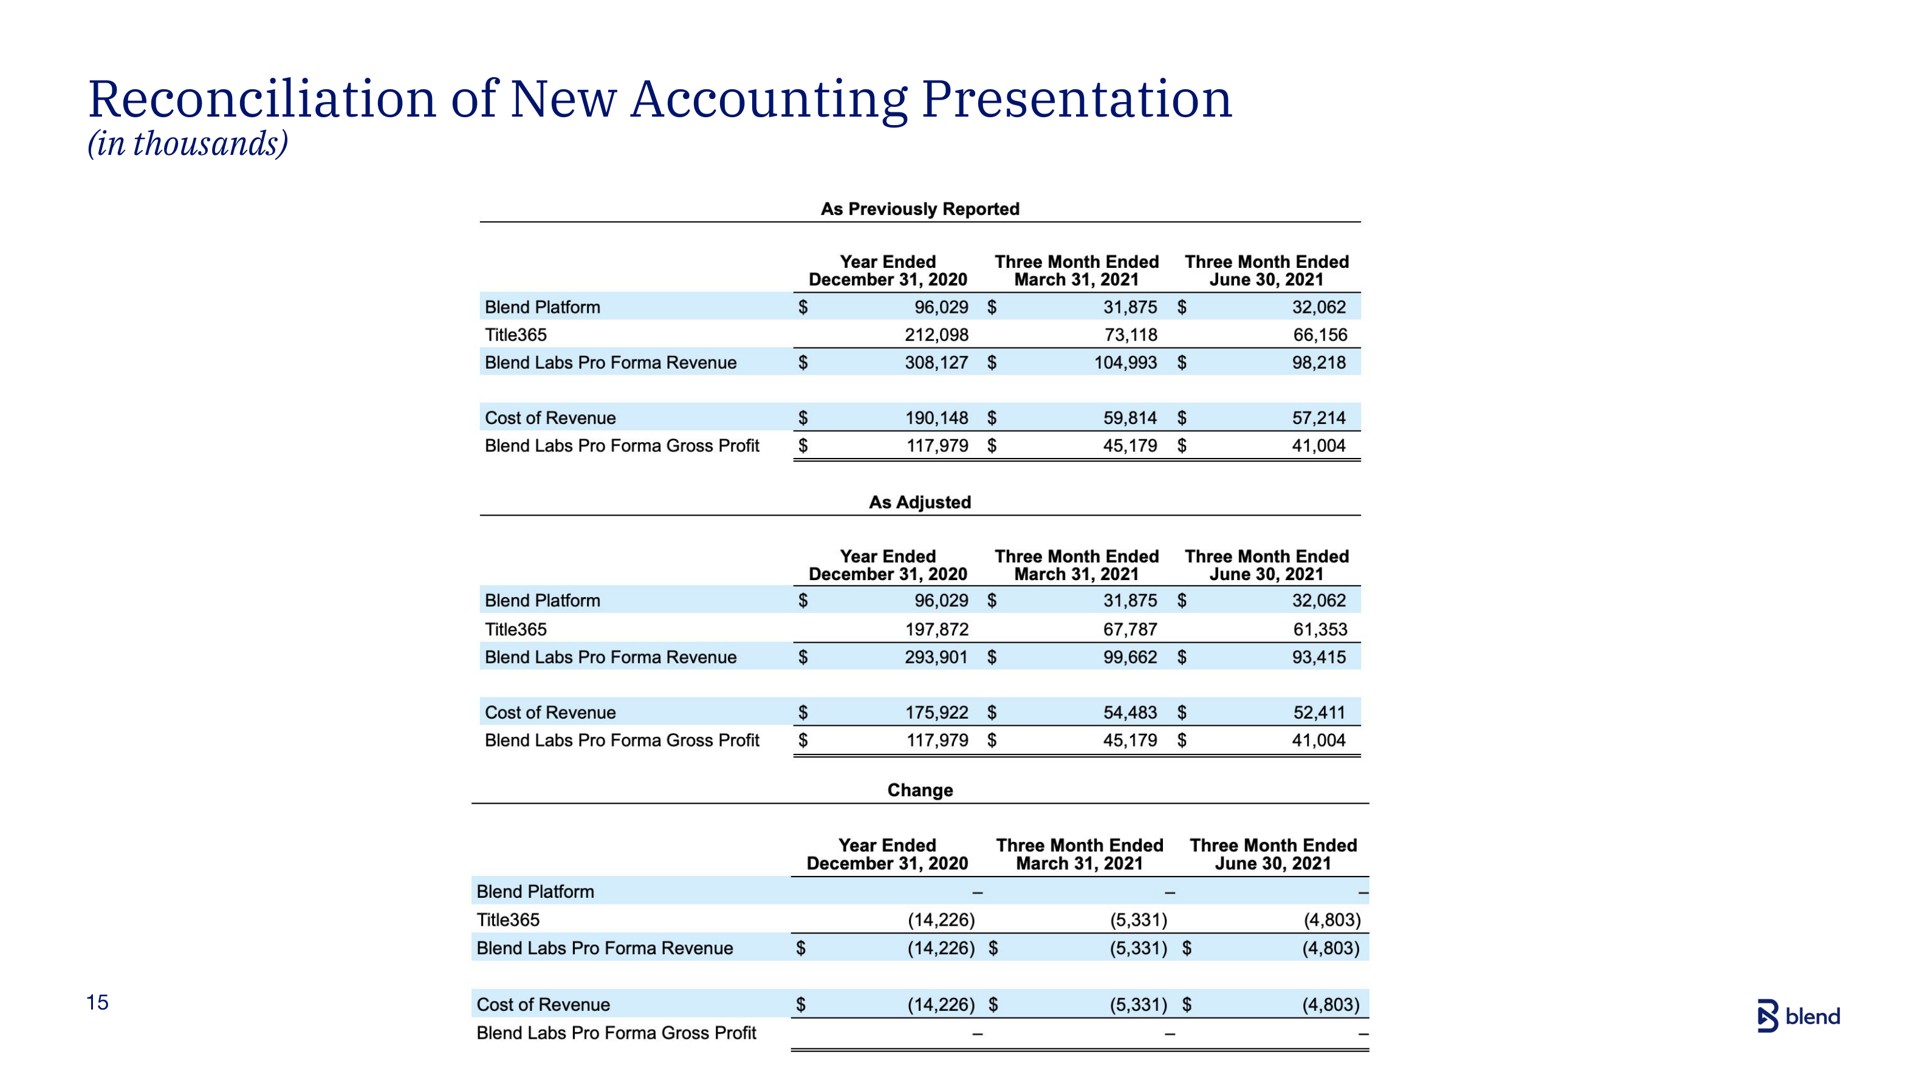 reconciliation of new accounting presentation | Blend